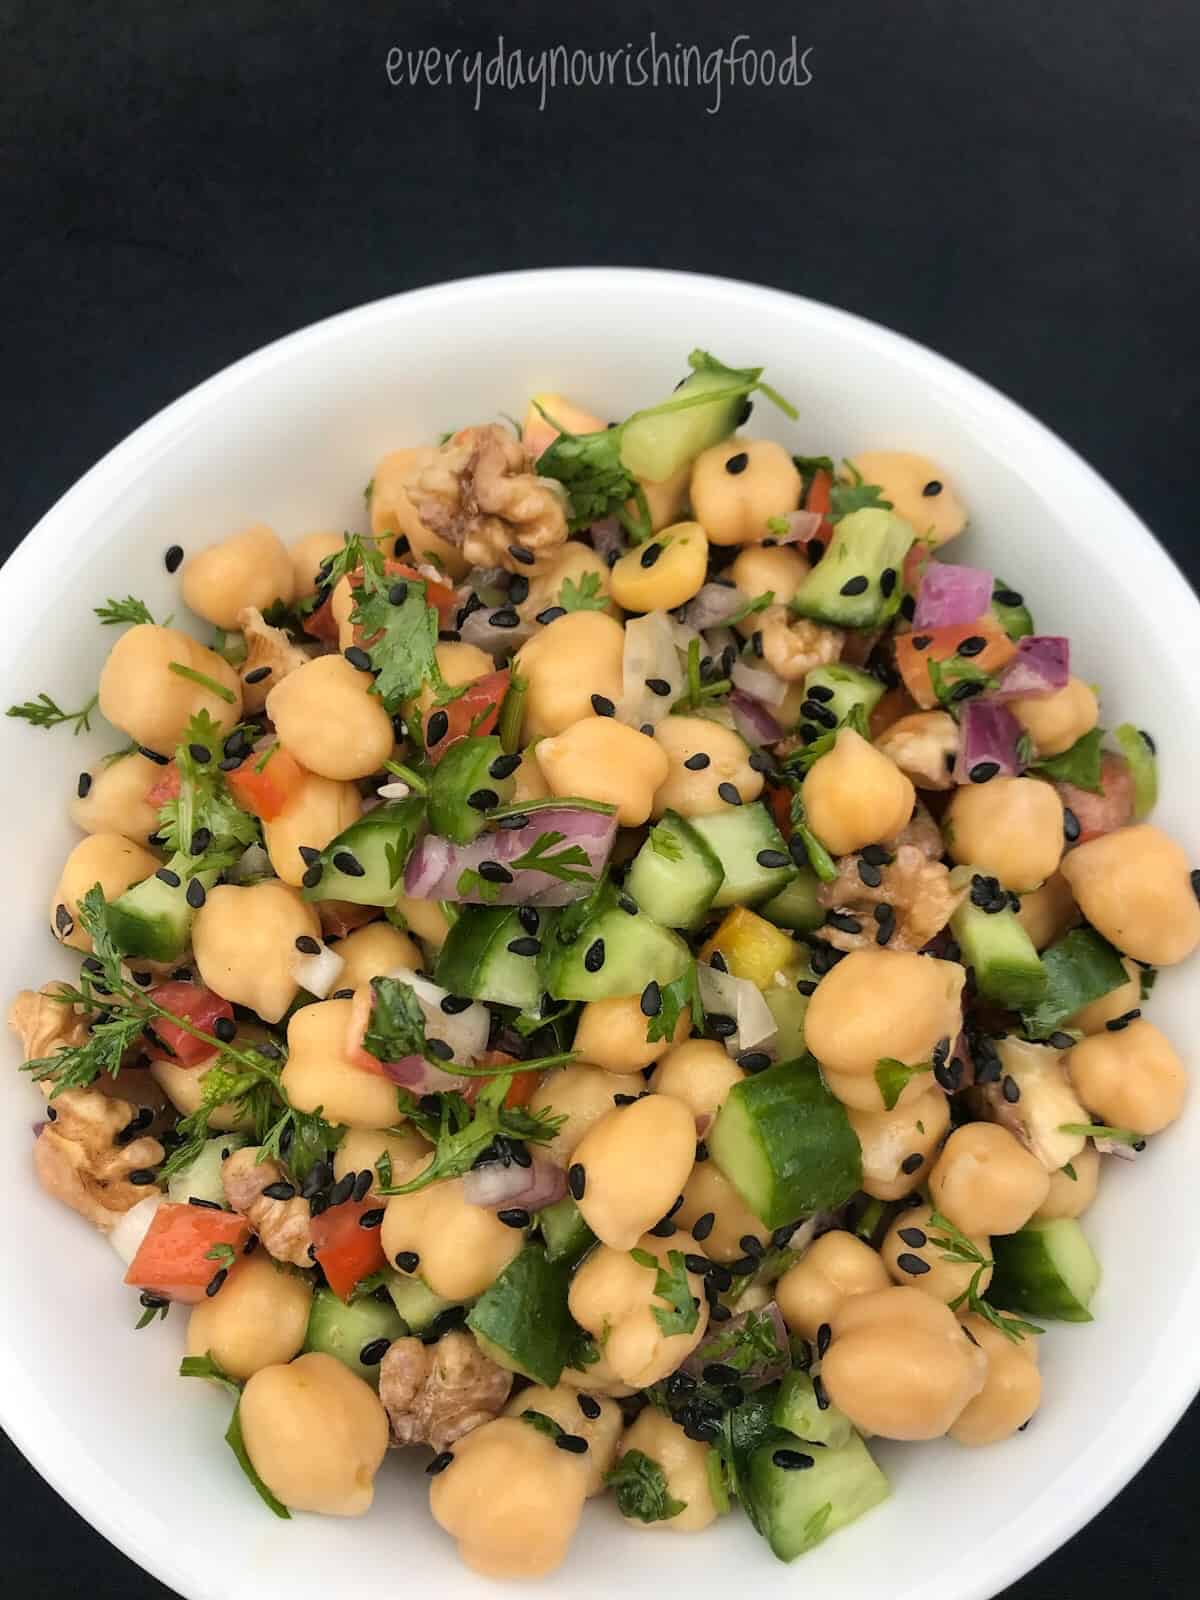 spicy Indian chickpeas salad in a bowl